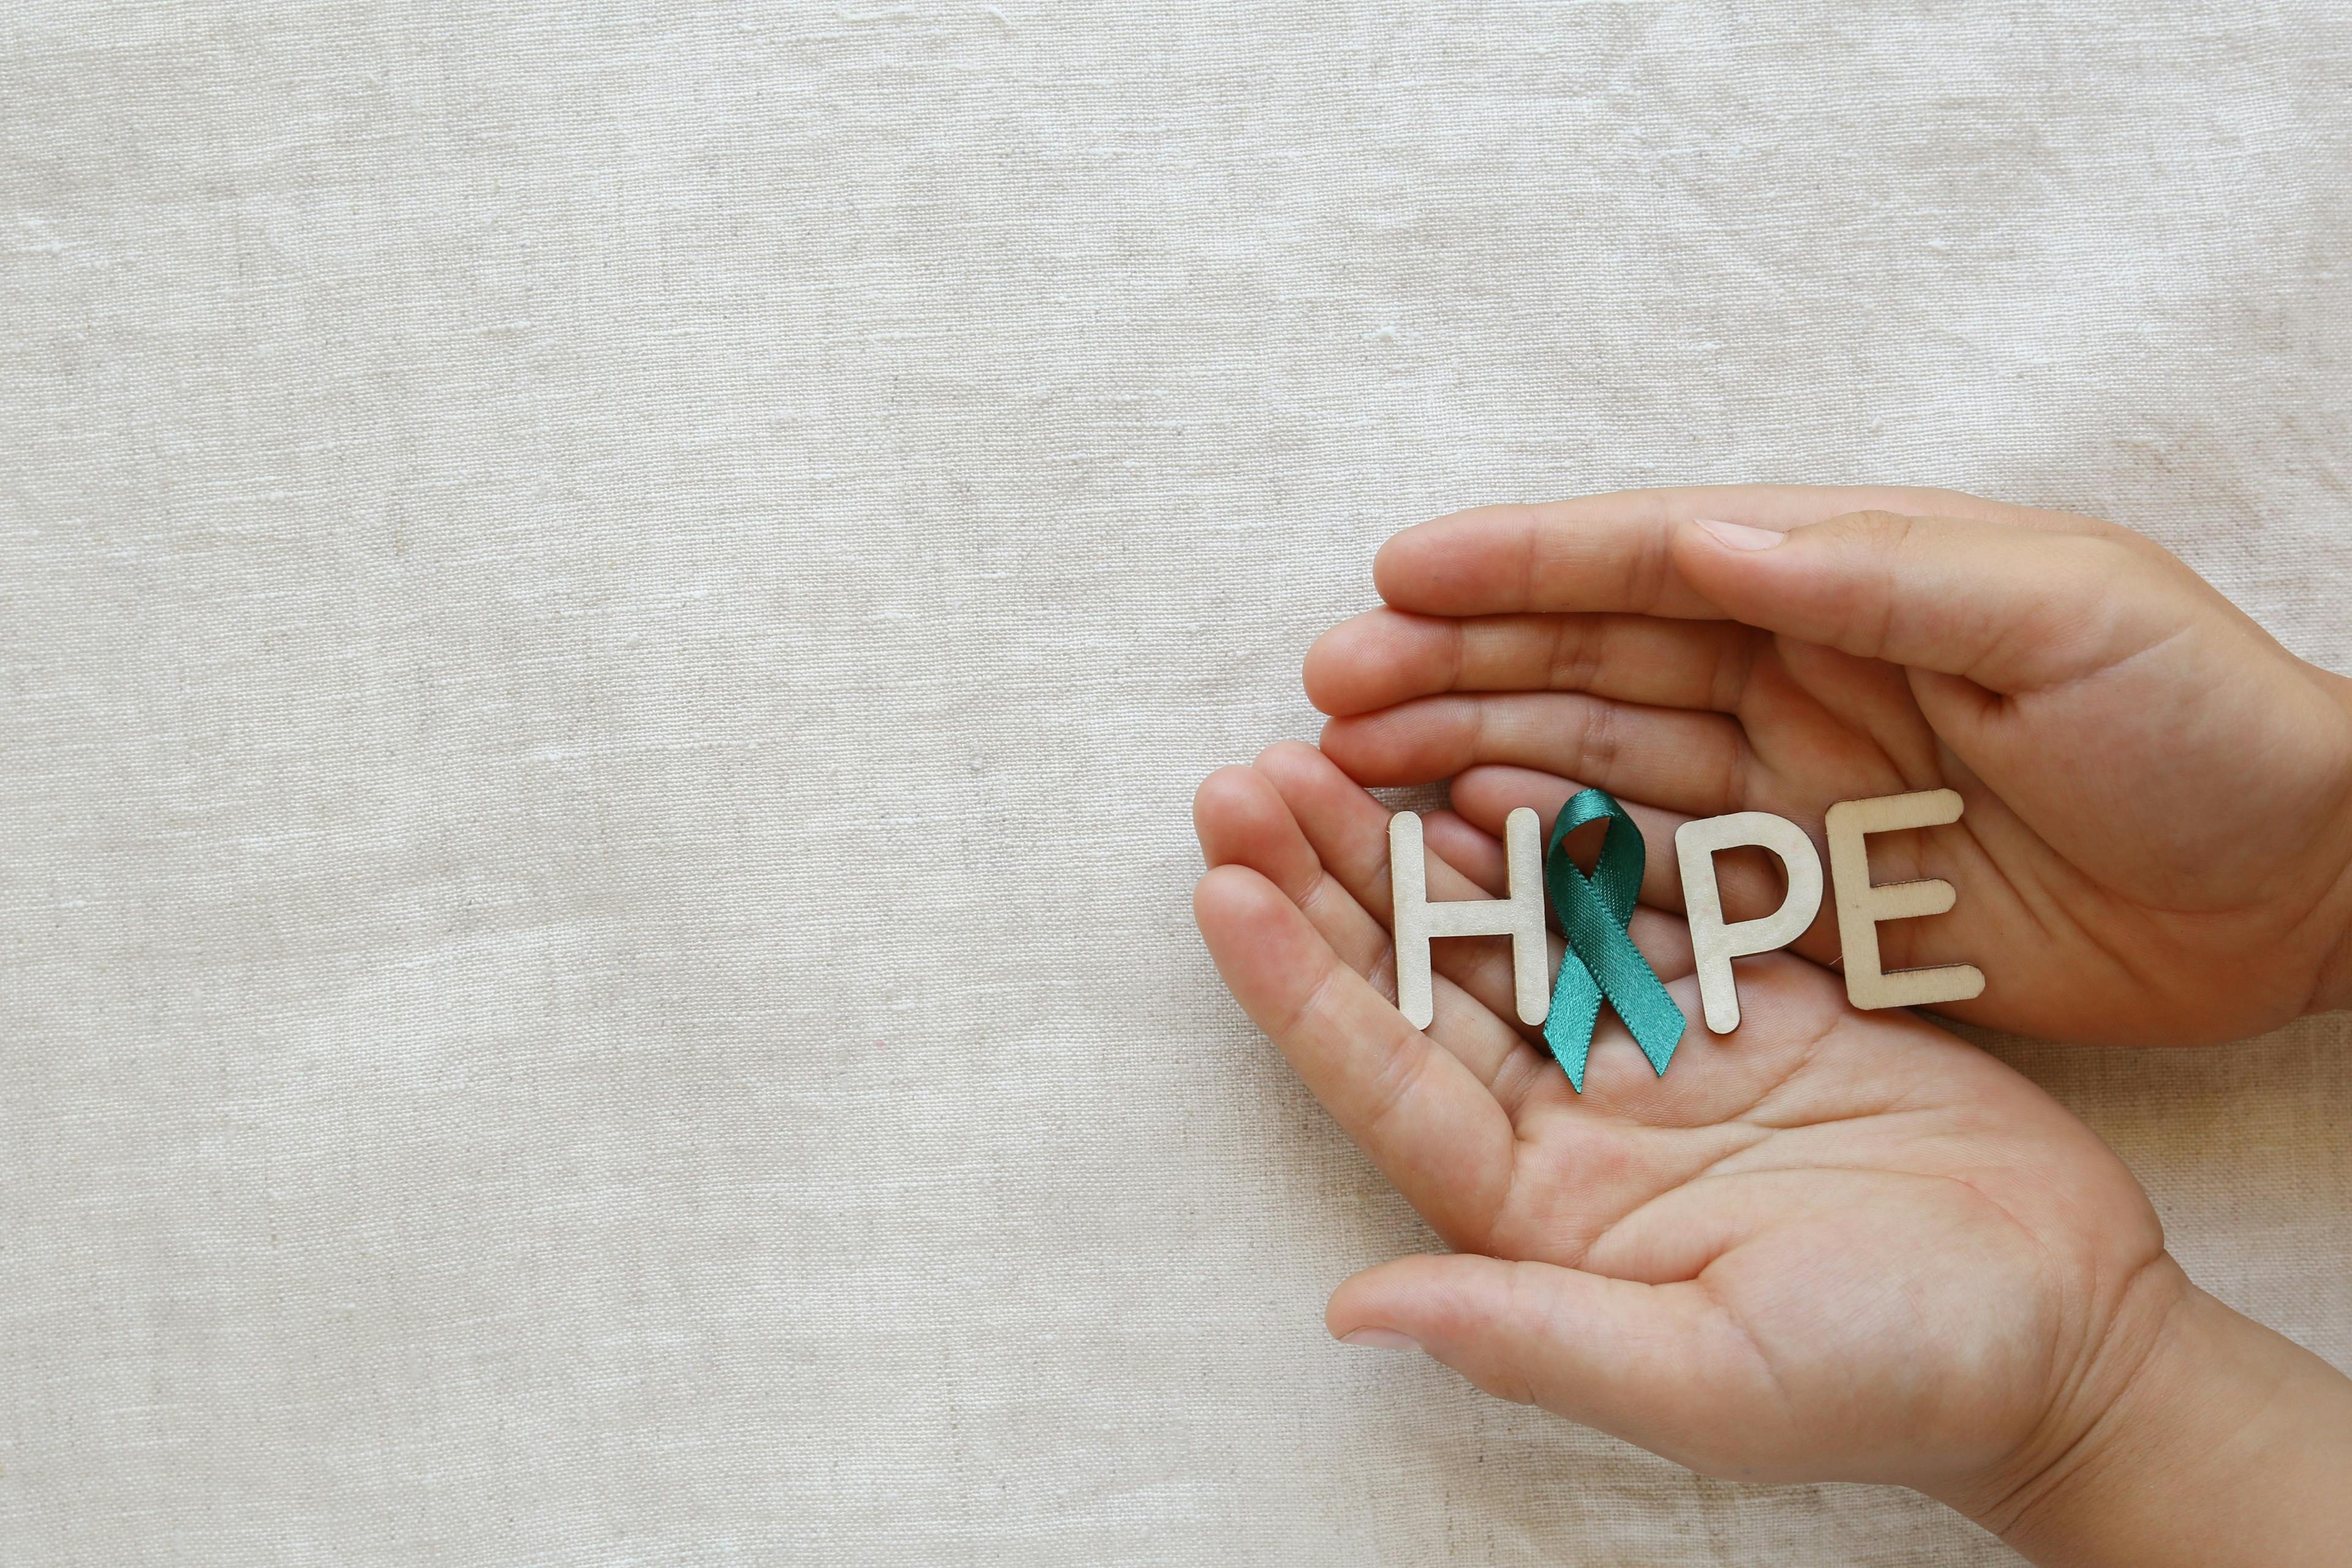 image of "hope" in a pair of hands.